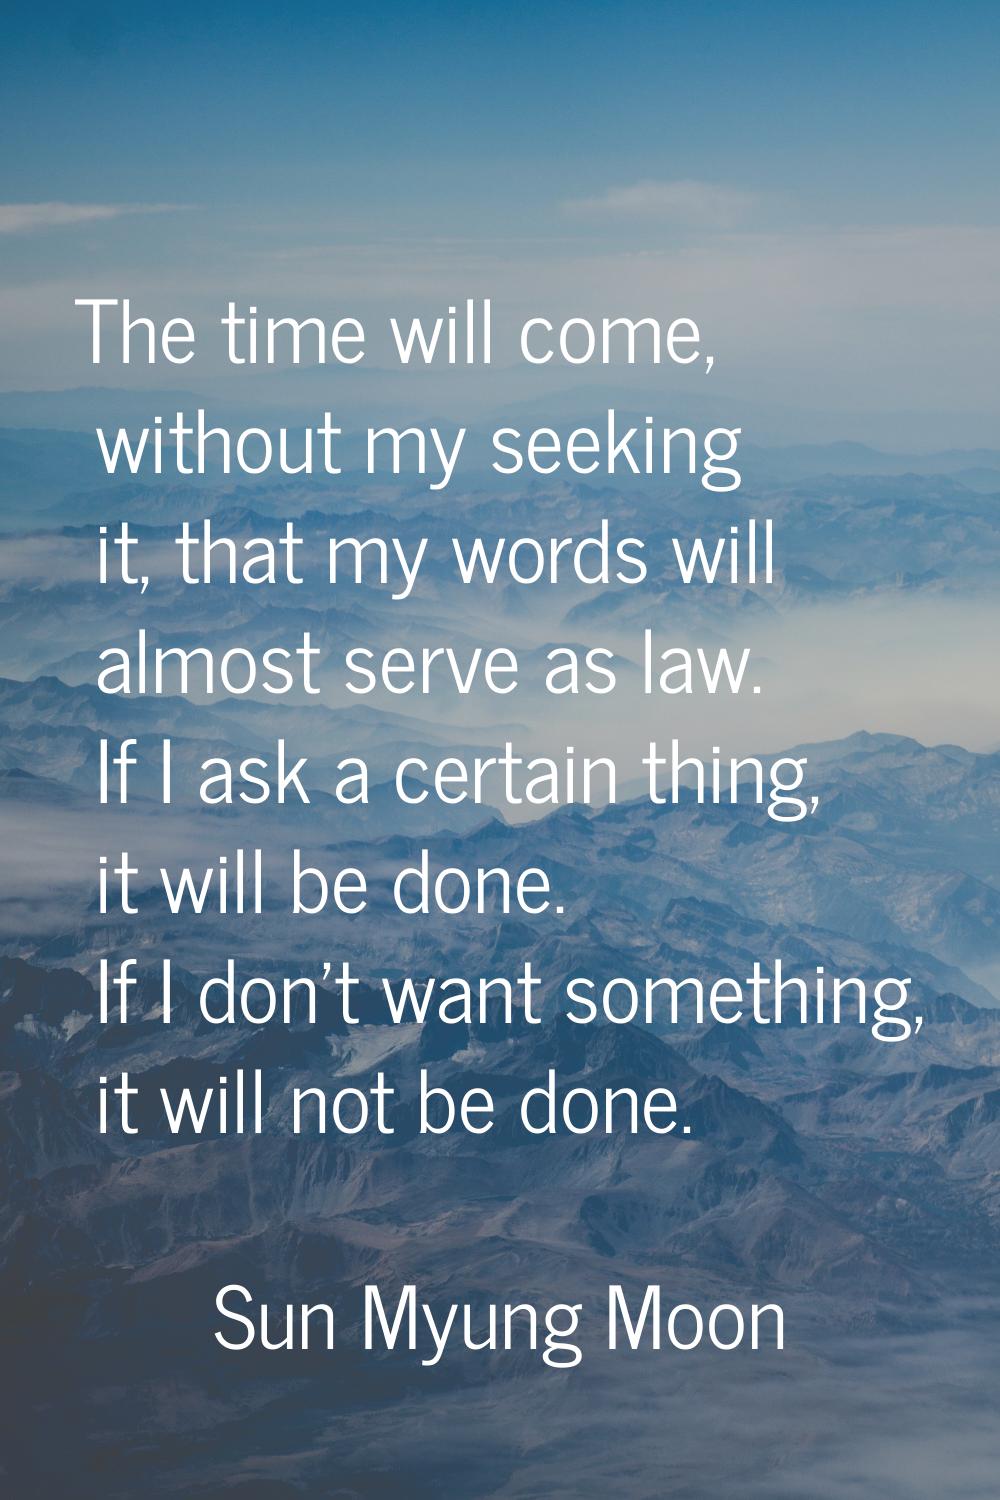 The time will come, without my seeking it, that my words will almost serve as law. If I ask a certa